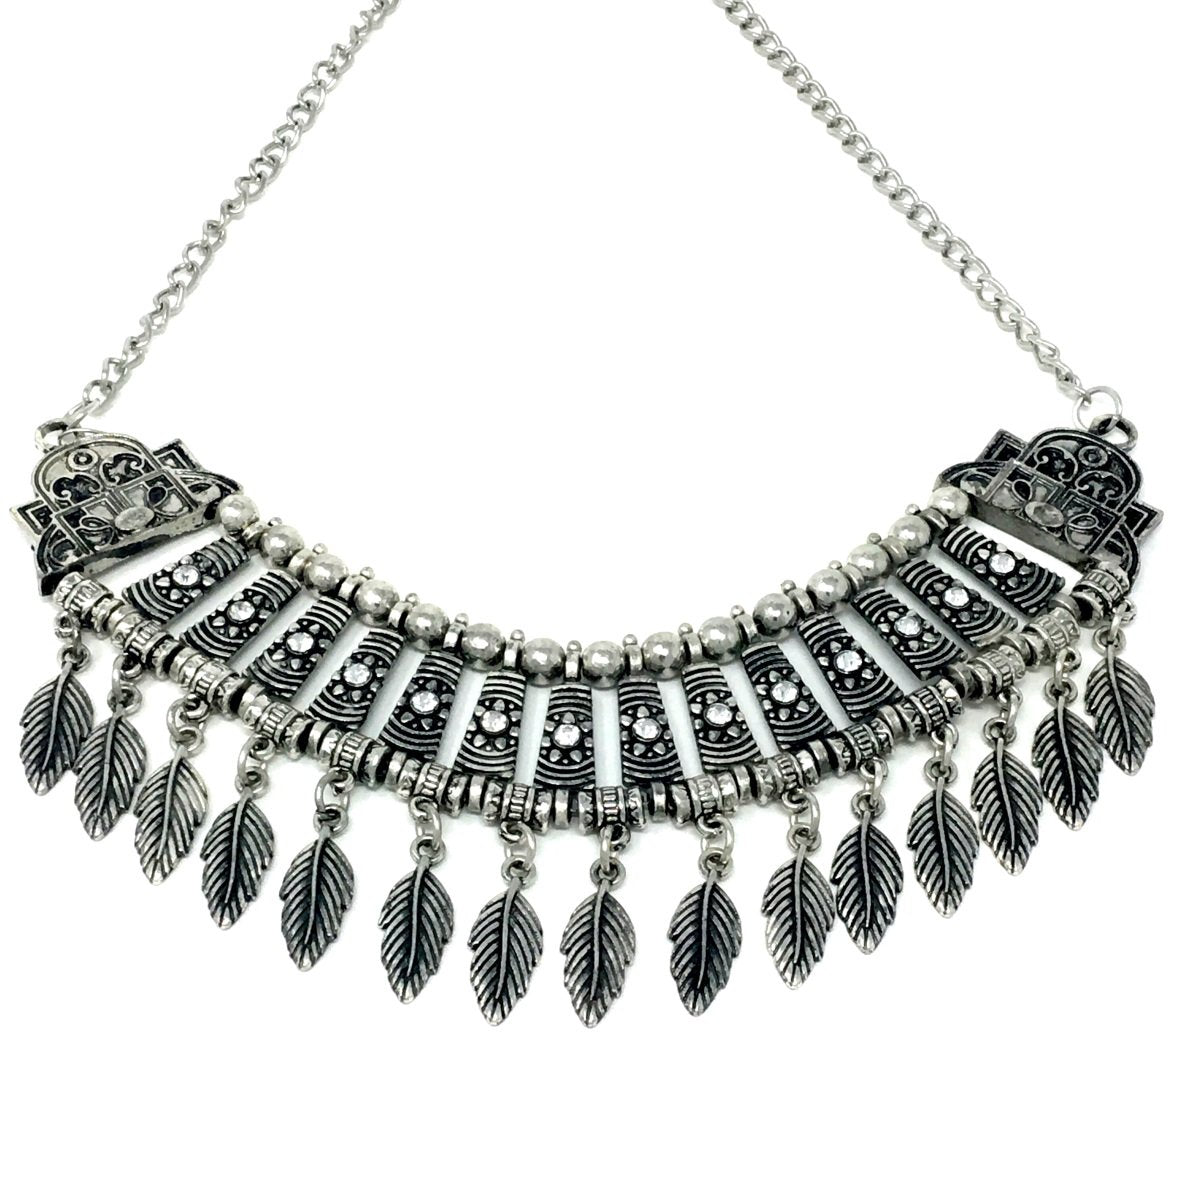 Antique Silver Necklace with Dangling Leaves